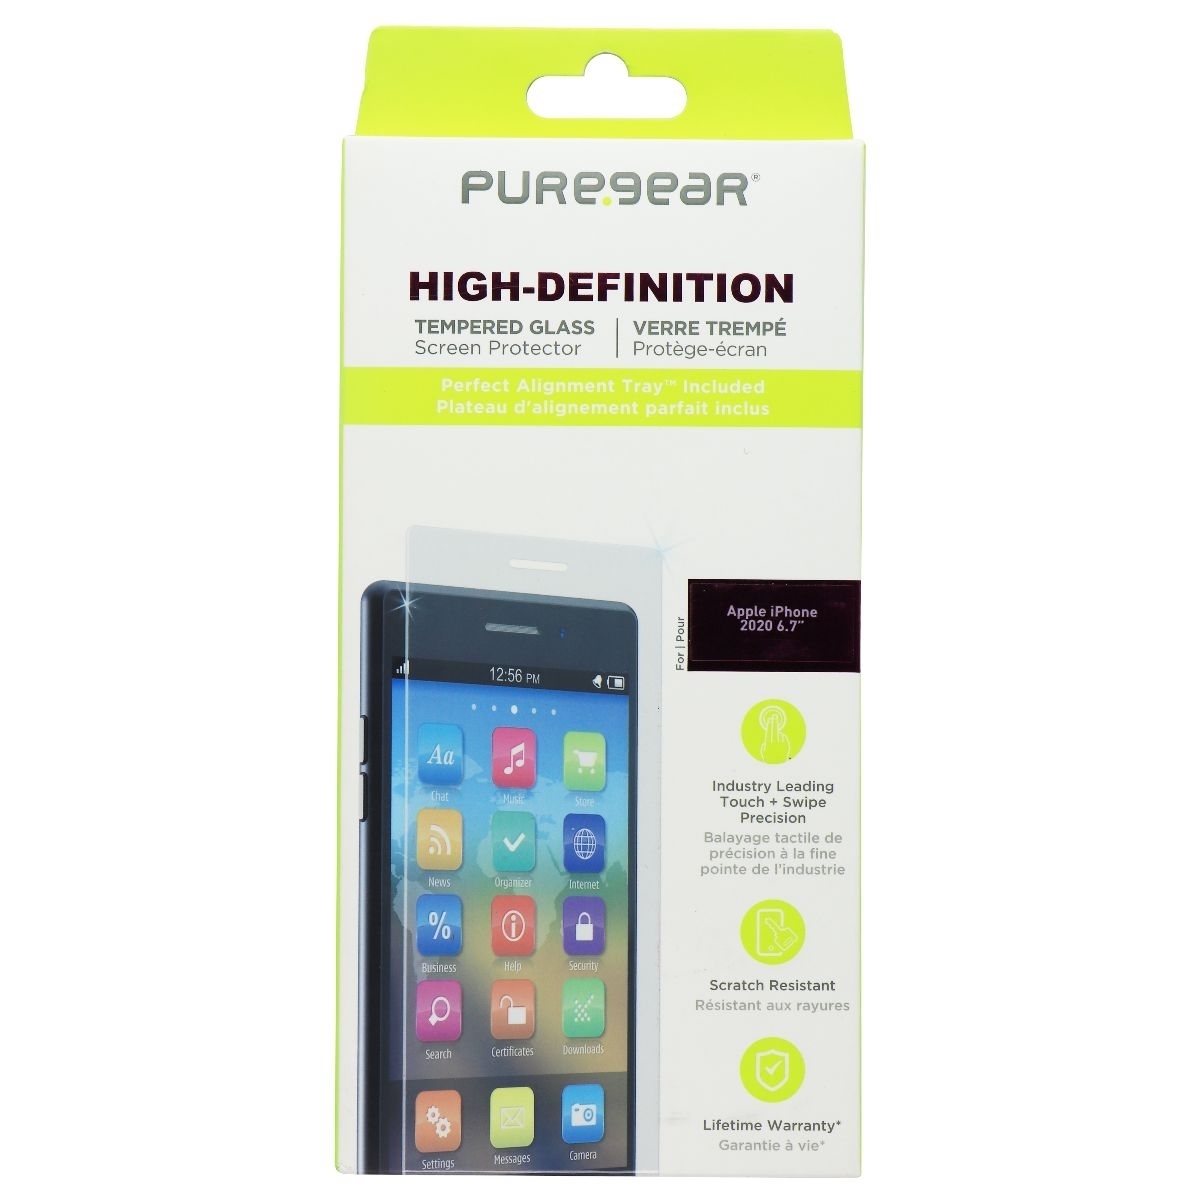 PureGear High-Definition Tempered Glass For IPhone 12 Pro Max - Clear (Refurbished)